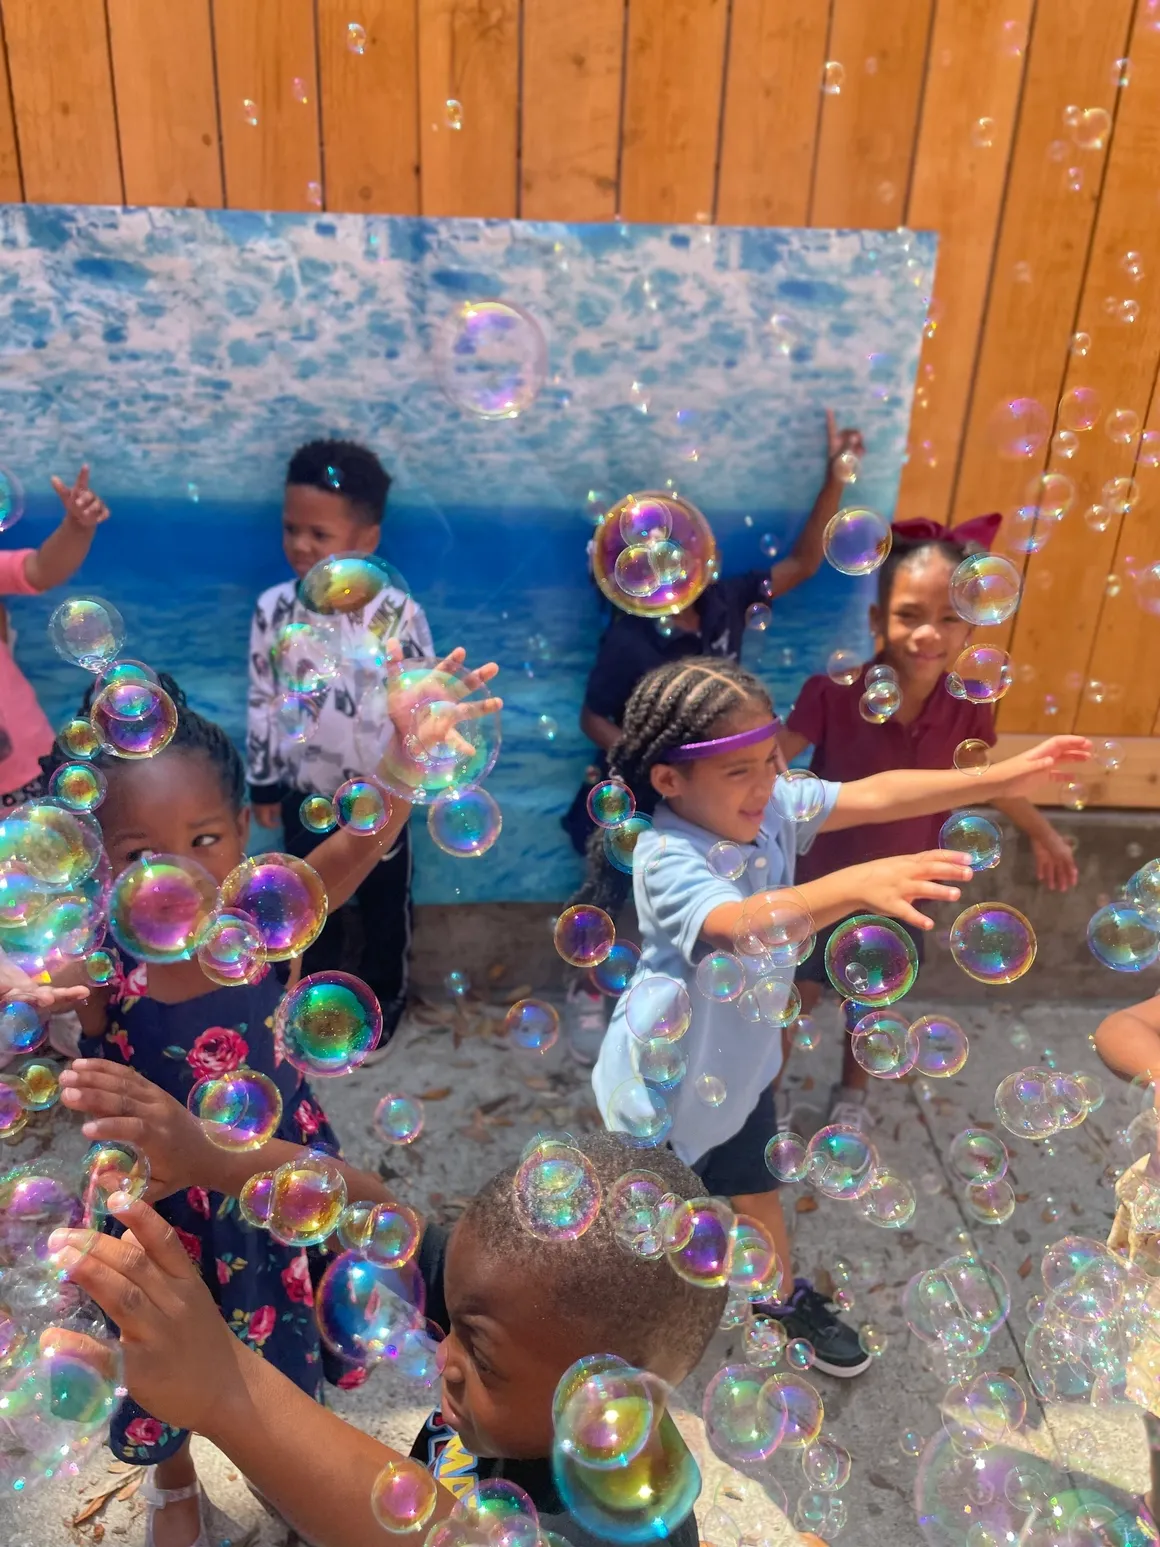 A group of people playing with bubbles in front of a mural.